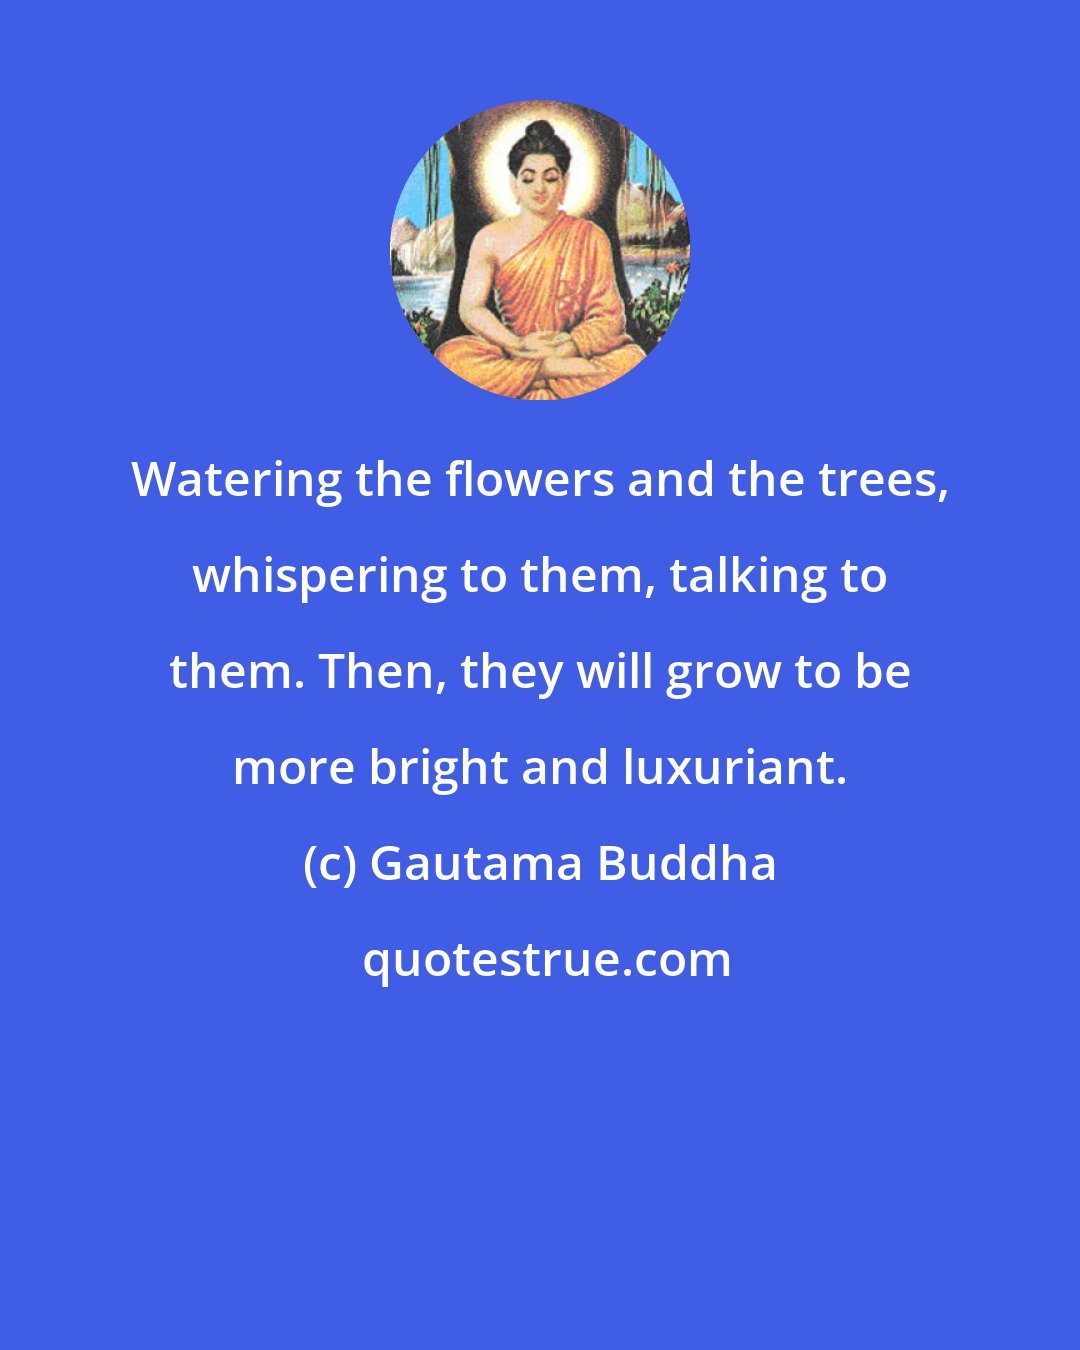 Gautama Buddha: Watering the flowers and the trees, whispering to them, talking to them. Then, they will grow to be more bright and luxuriant.